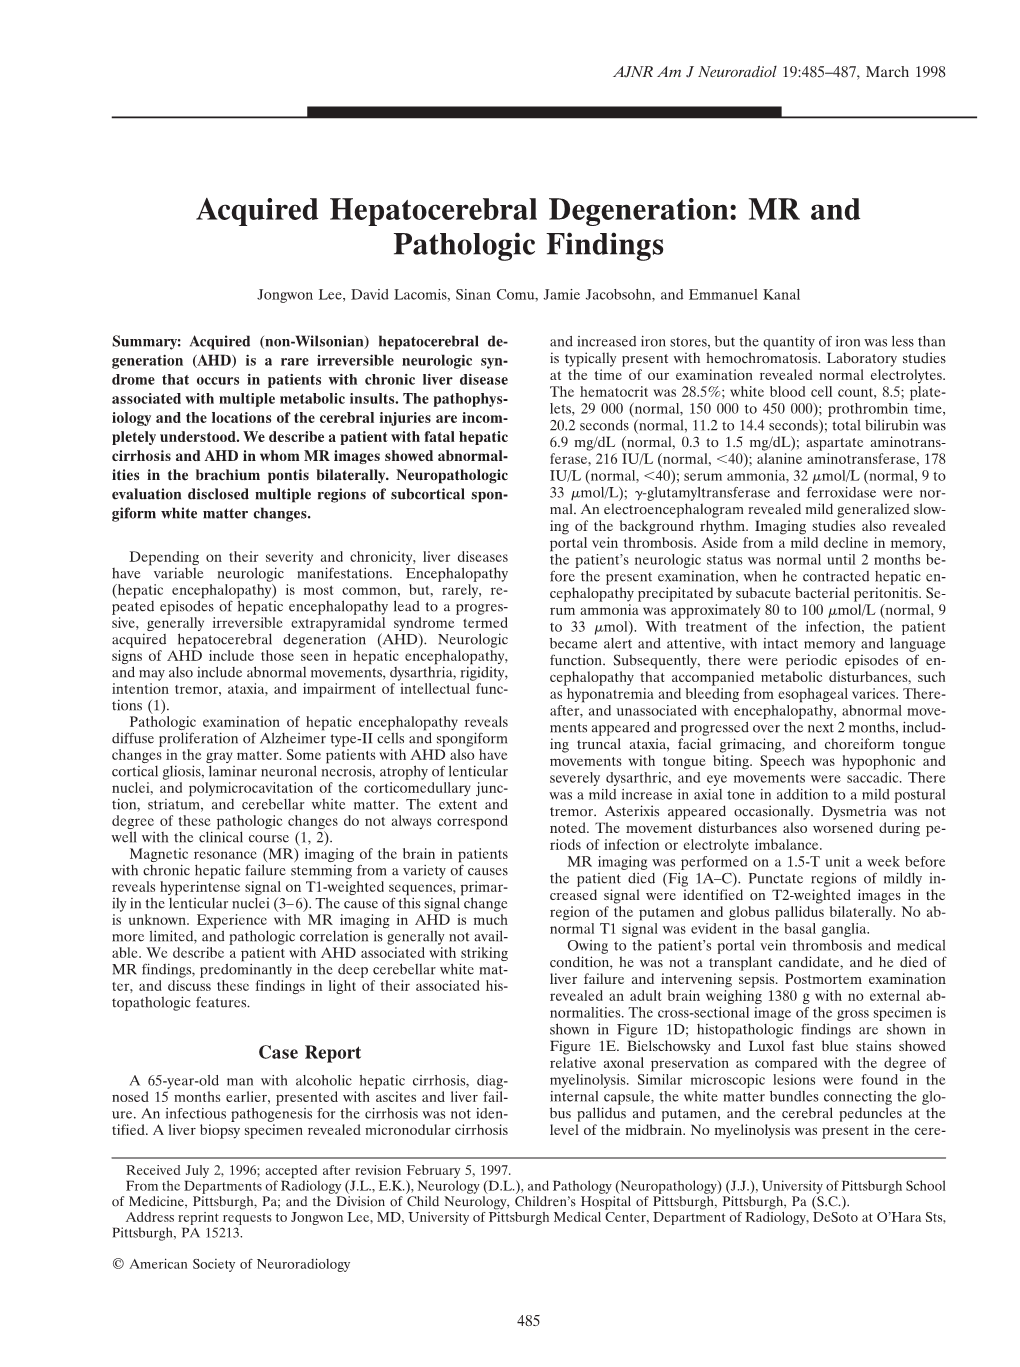 Acquired Hepatocerebral Degeneration: MR and Pathologic Findings